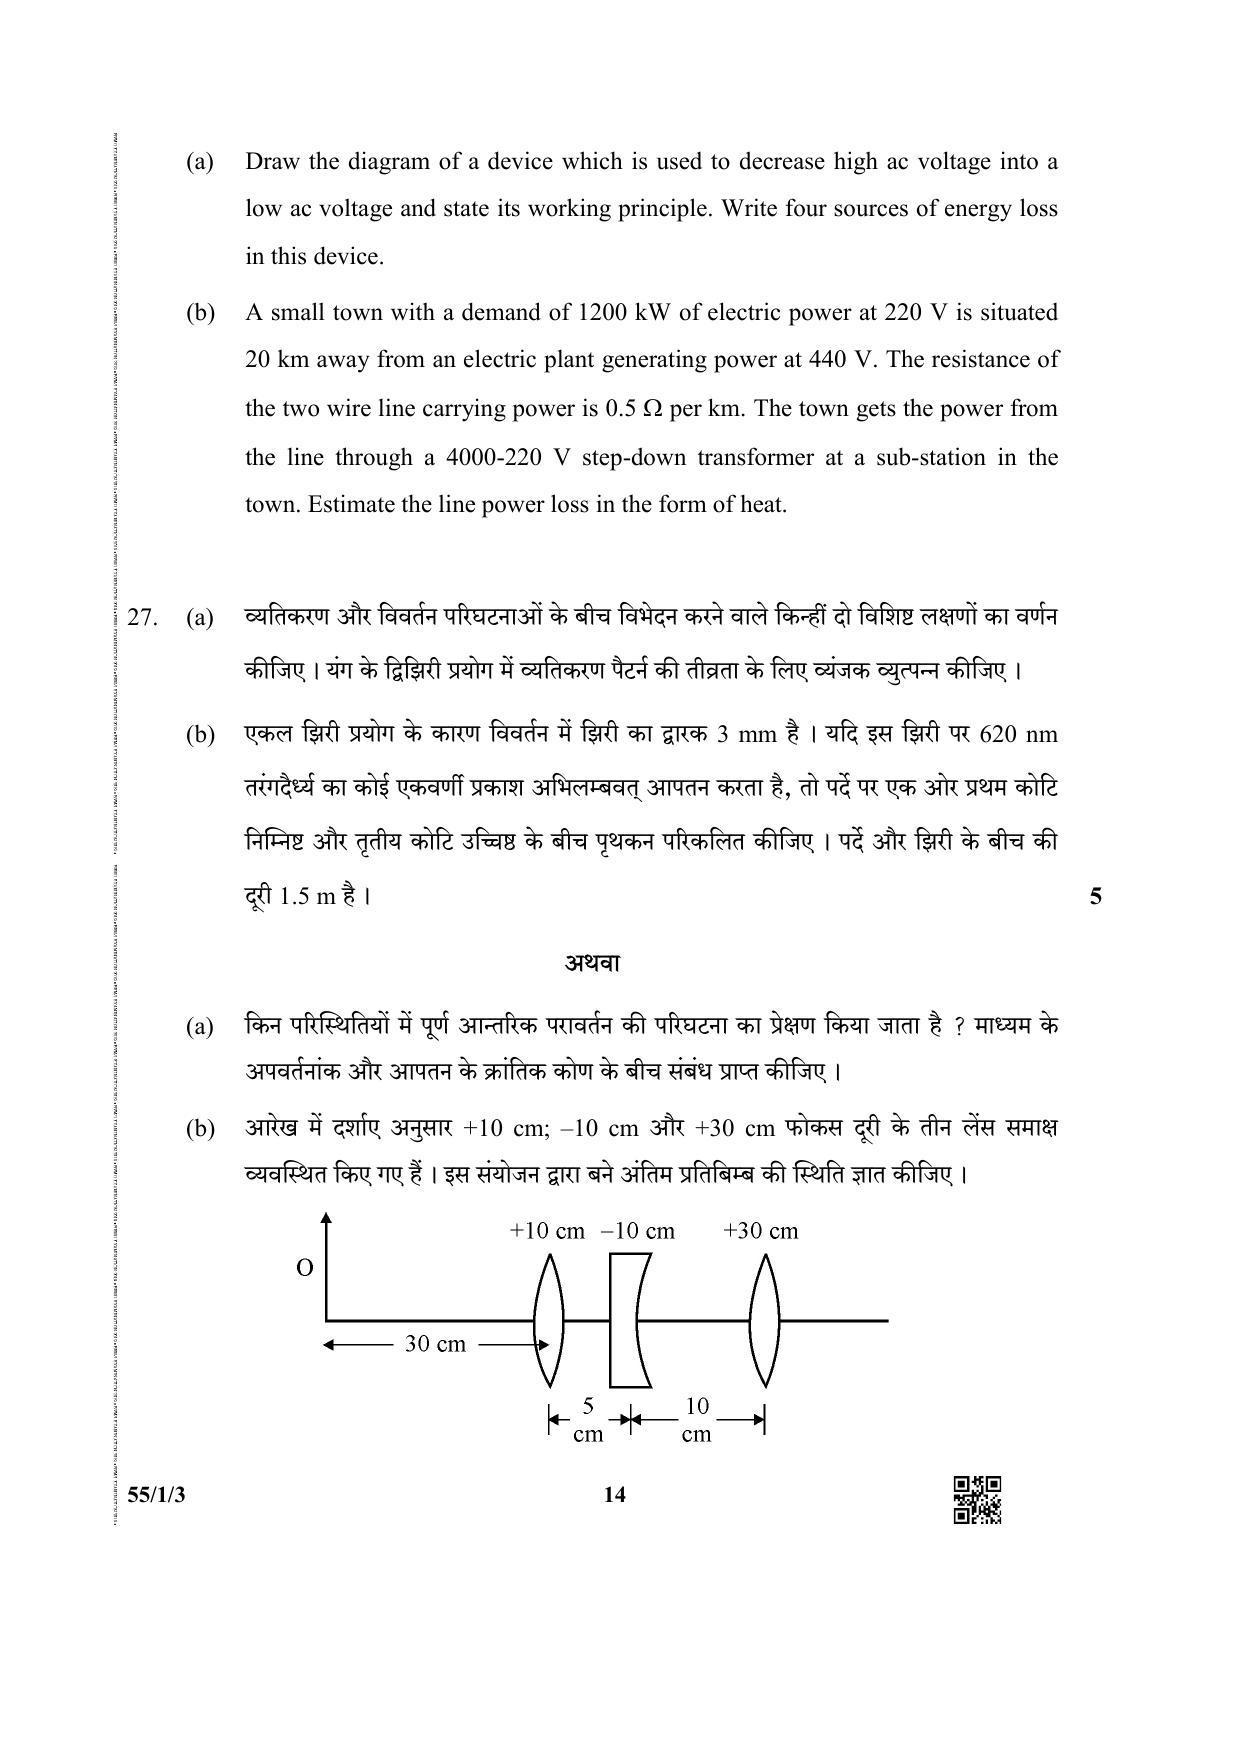 CBSE Class 12 55-1-3 (Physics) 2019 Question Paper - Page 14